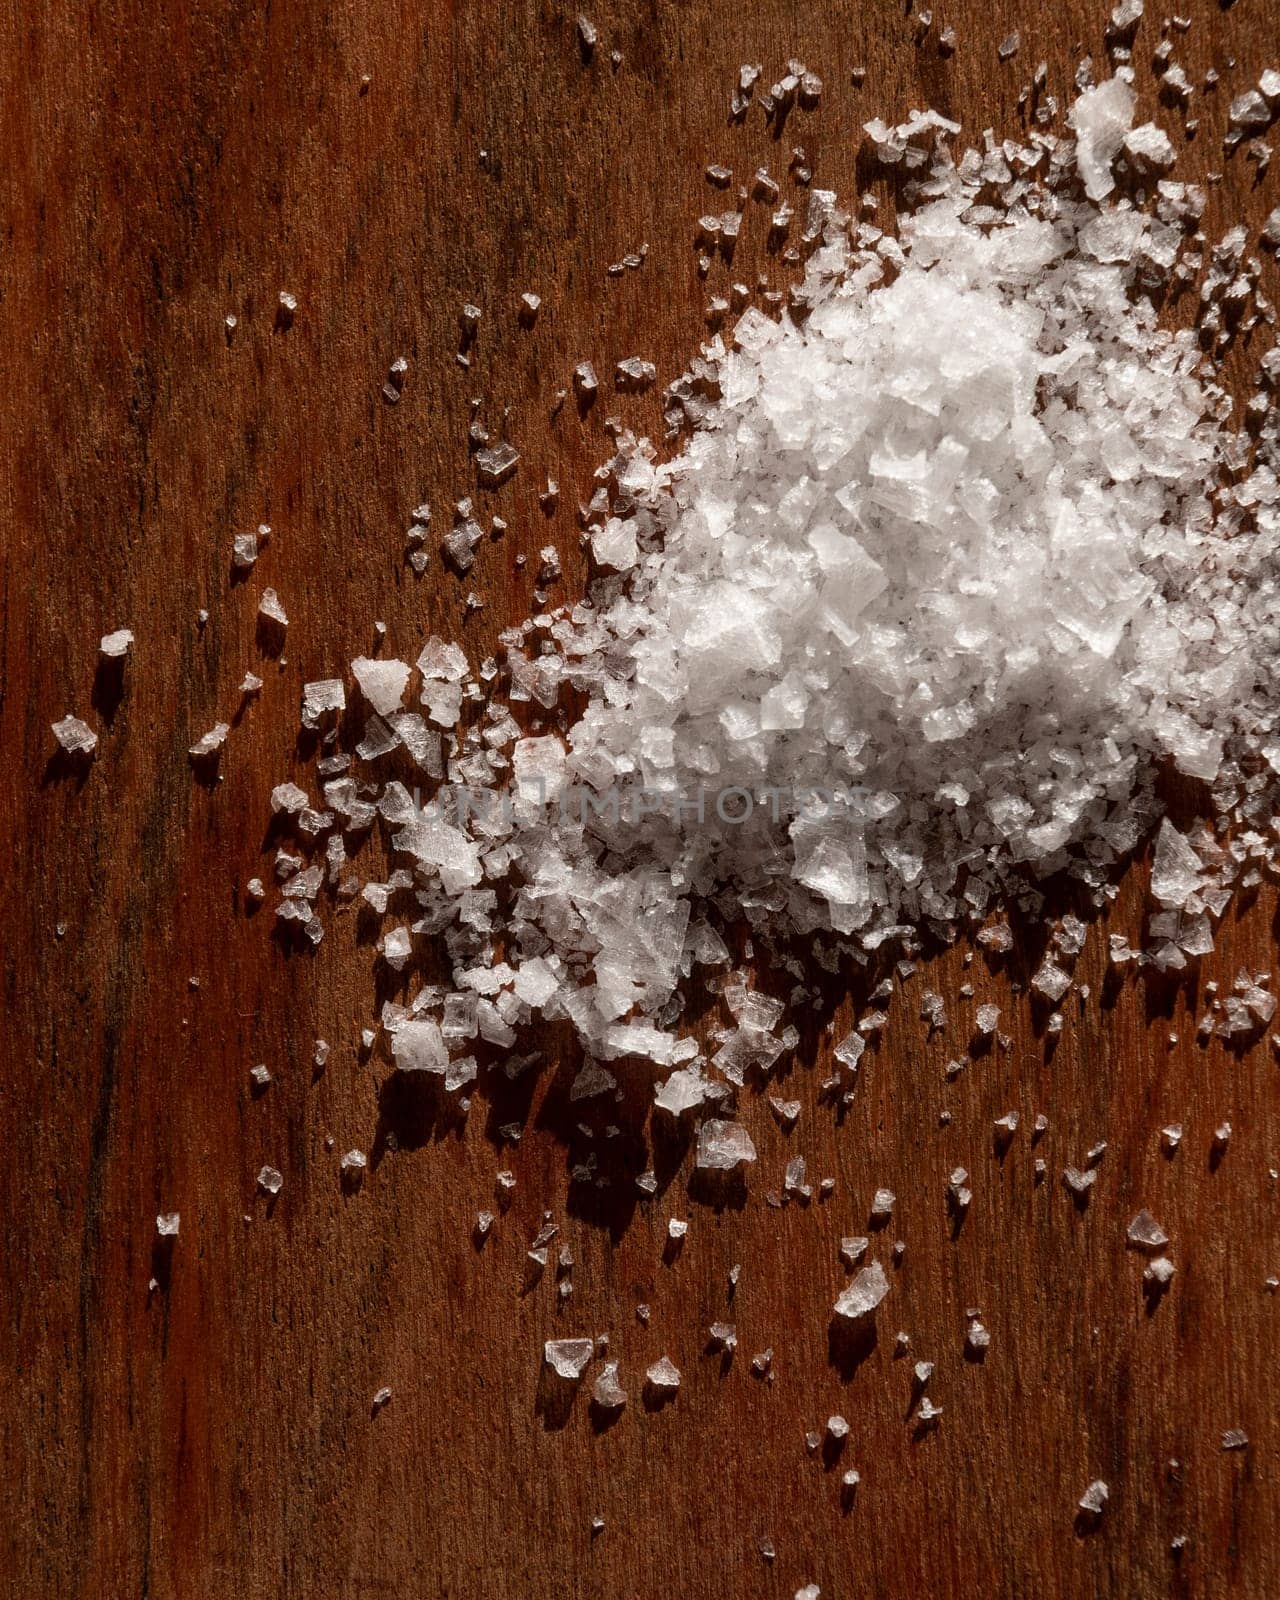 A rustic wooden table with a heap of salt.